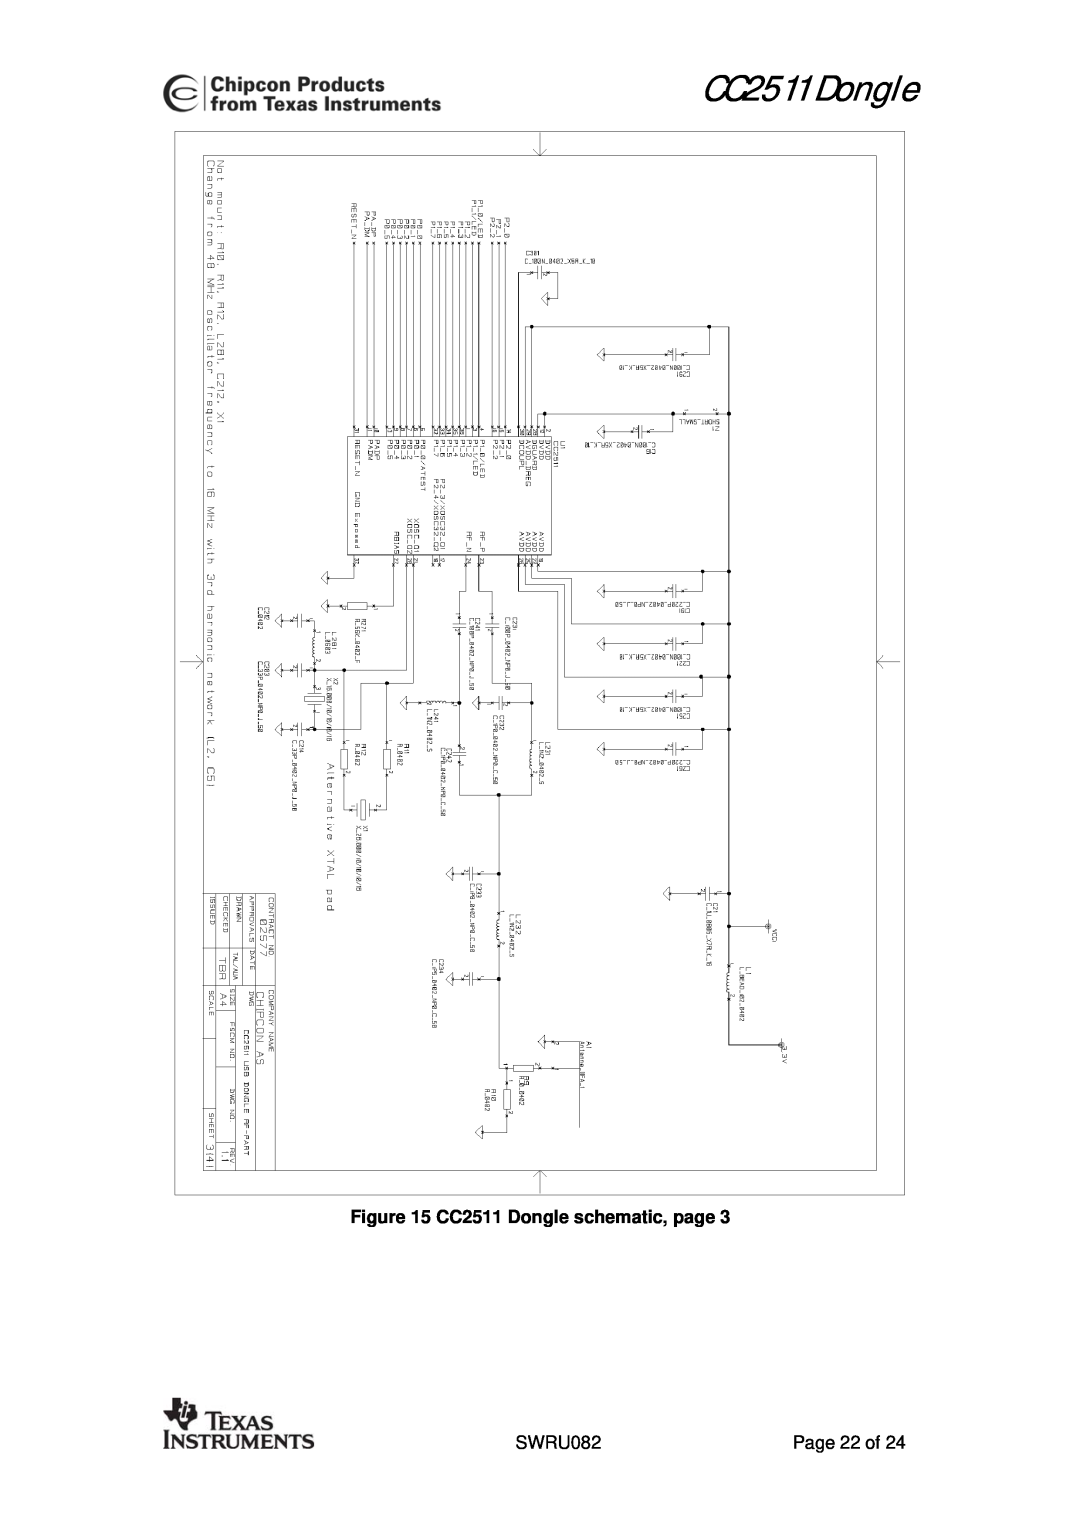 Texas Instruments user manual CC2511 Dongle schematic, page 